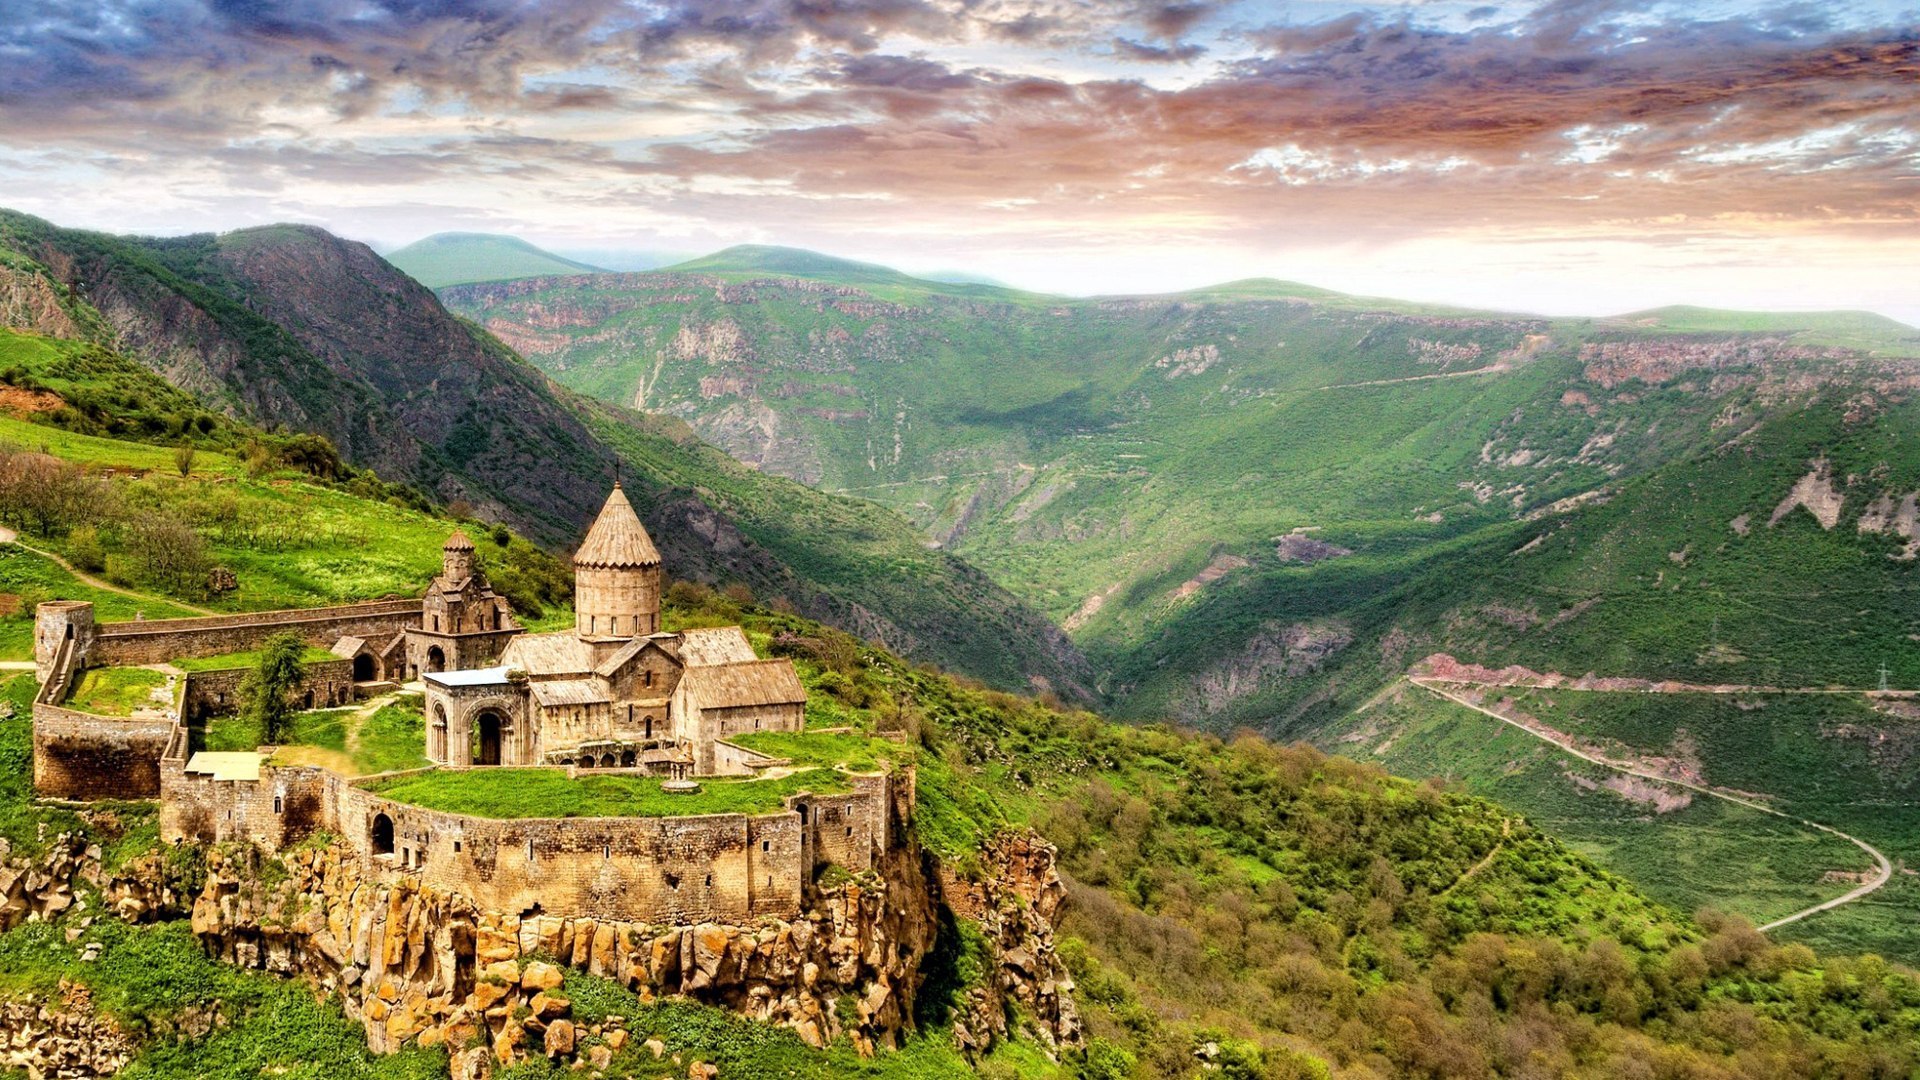 nature, Landscape, Trees, Forest, Castle, Monastery, Armenia, Mountains, Stones, Valley, Hills, Clouds Wallpaper